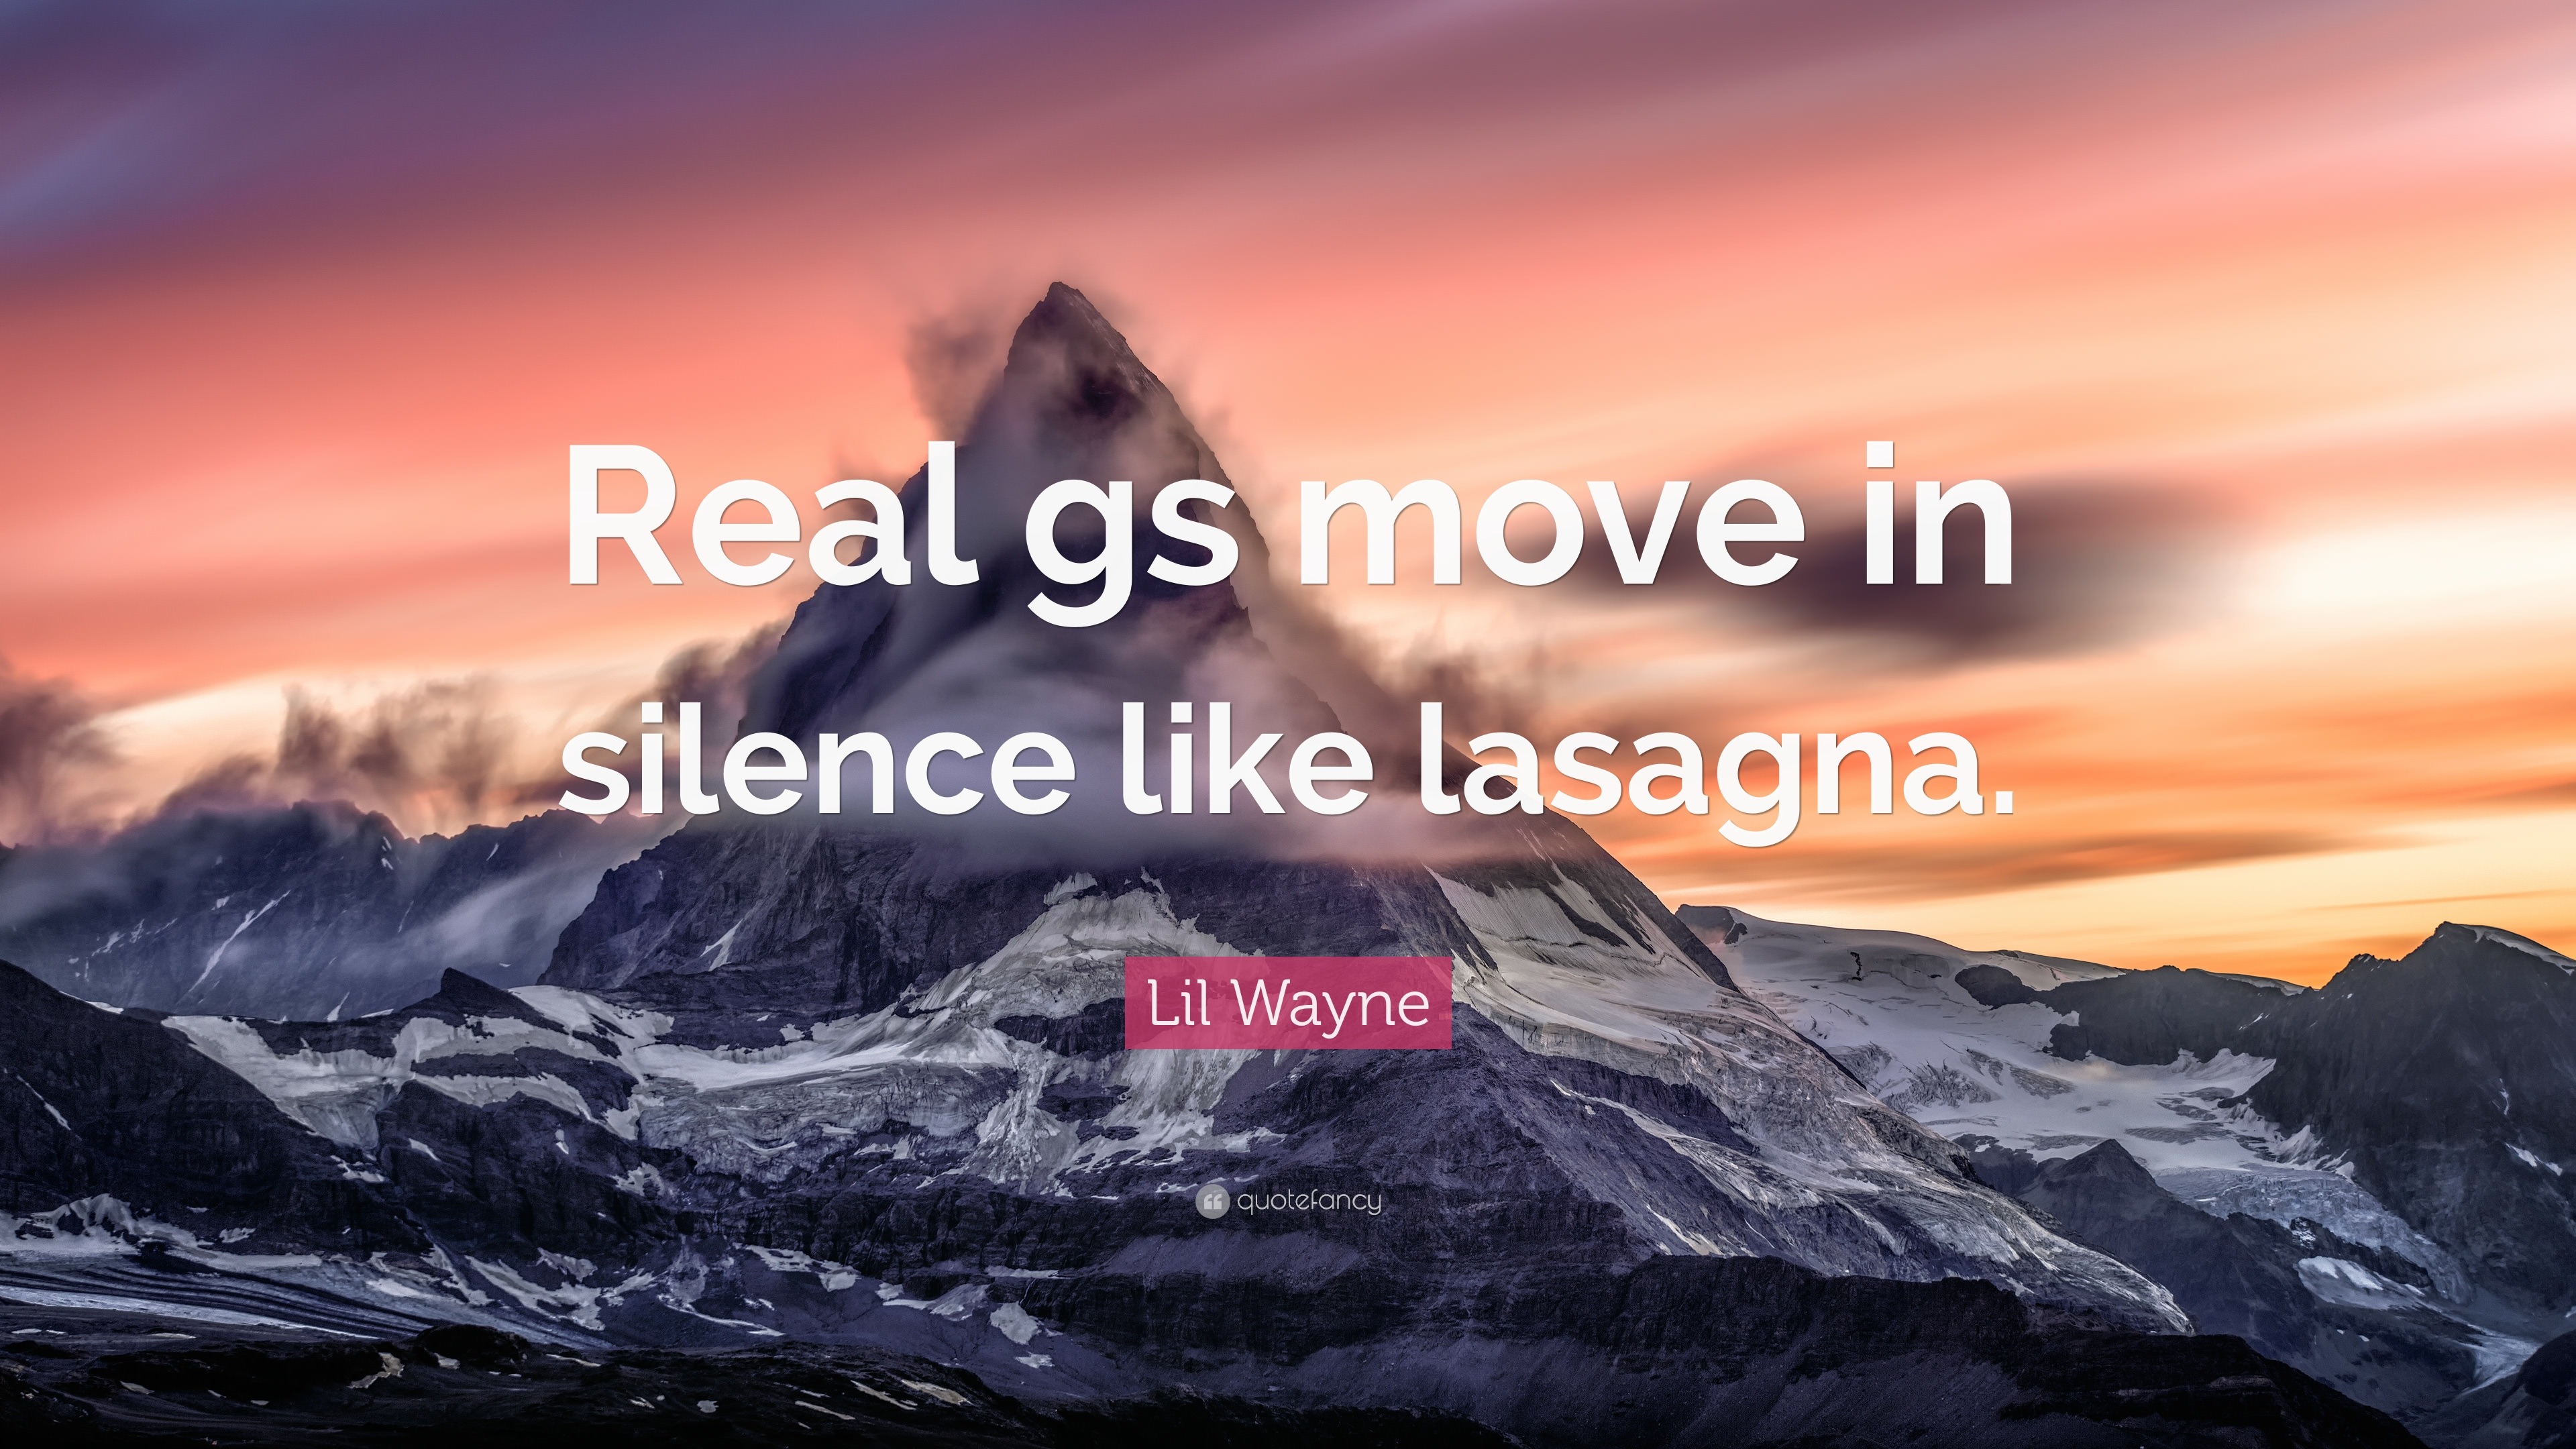 real gs move in silence like lasagna poster